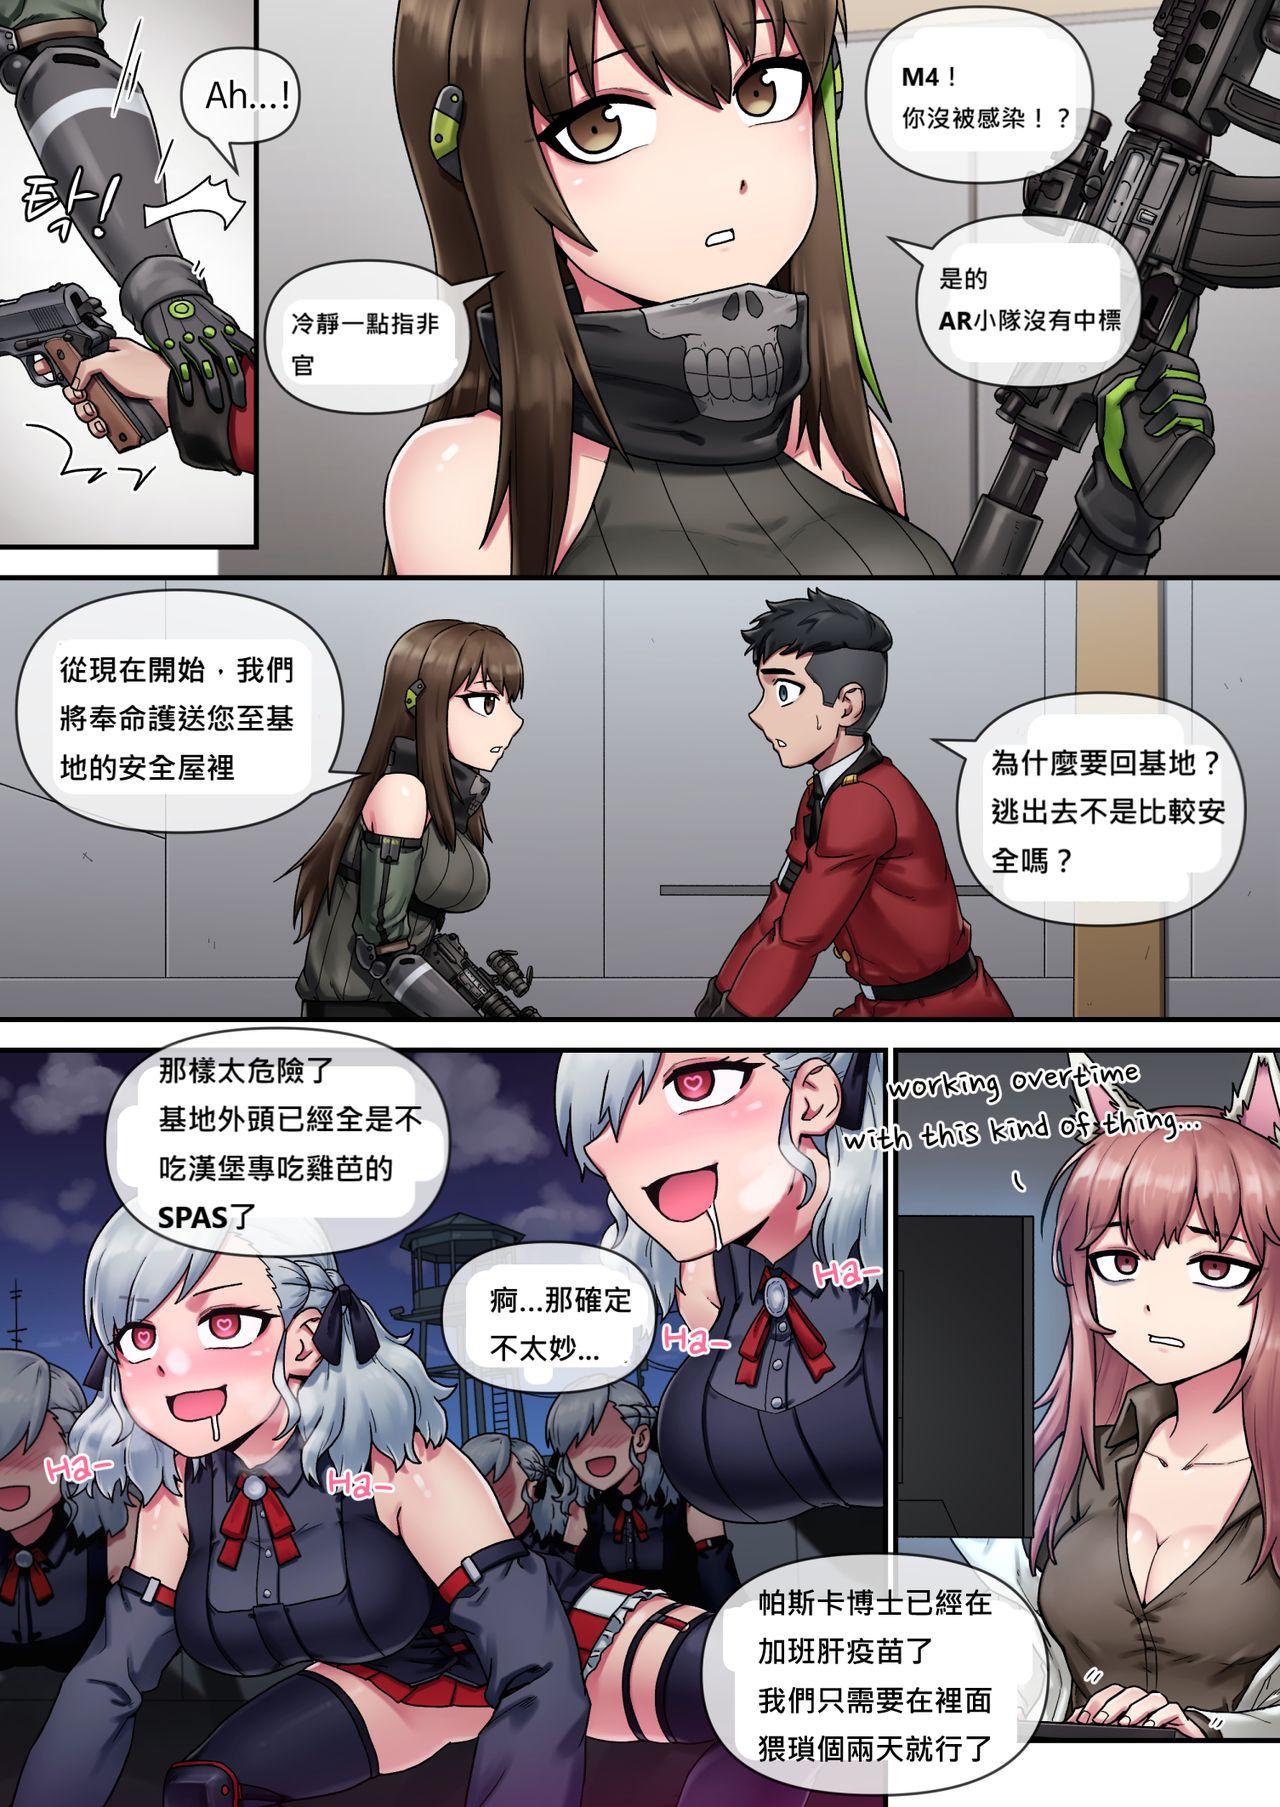 Oral Sex My Only Princess - Girls frontline Boob - Page 4